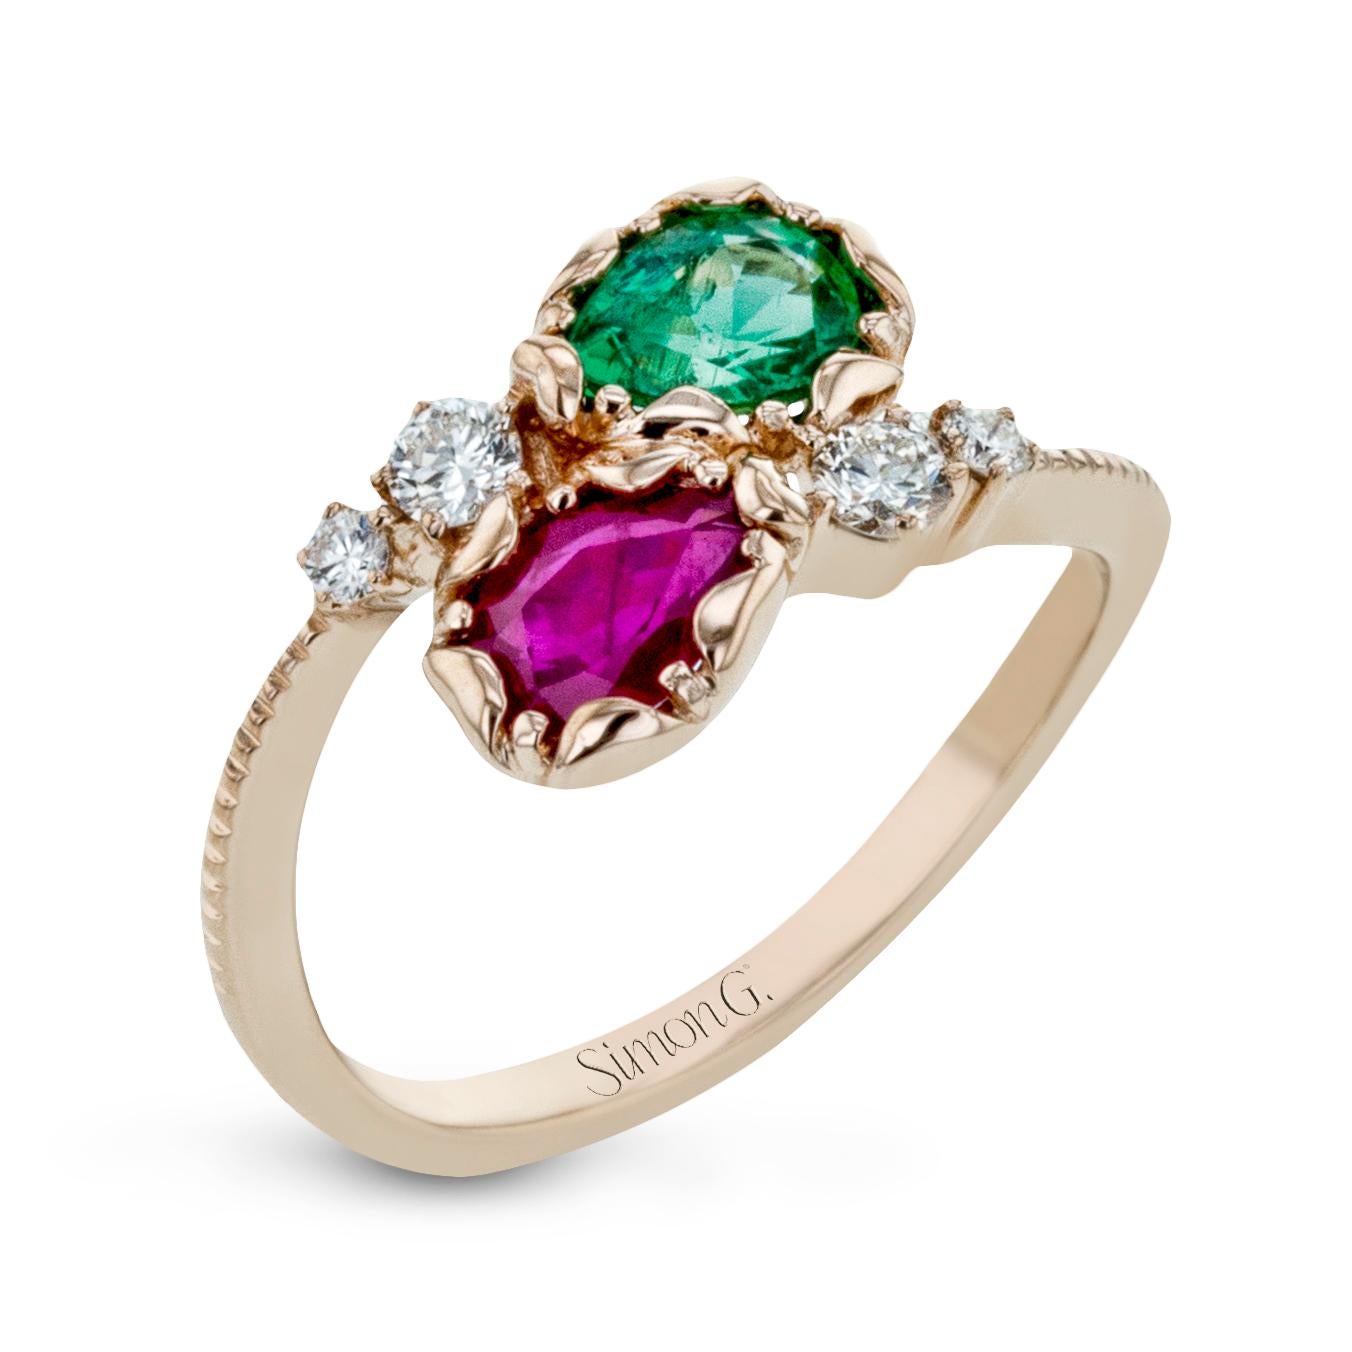 This unique ring features one 0.72 carat pear shaped pink sapphire, one 0.64 carat pear shaped green tsavorite, and 0.27carat total weight in round brilliant cut diamonds set in 18 karat rose gold. This ring is currently a size 6.5 but can be